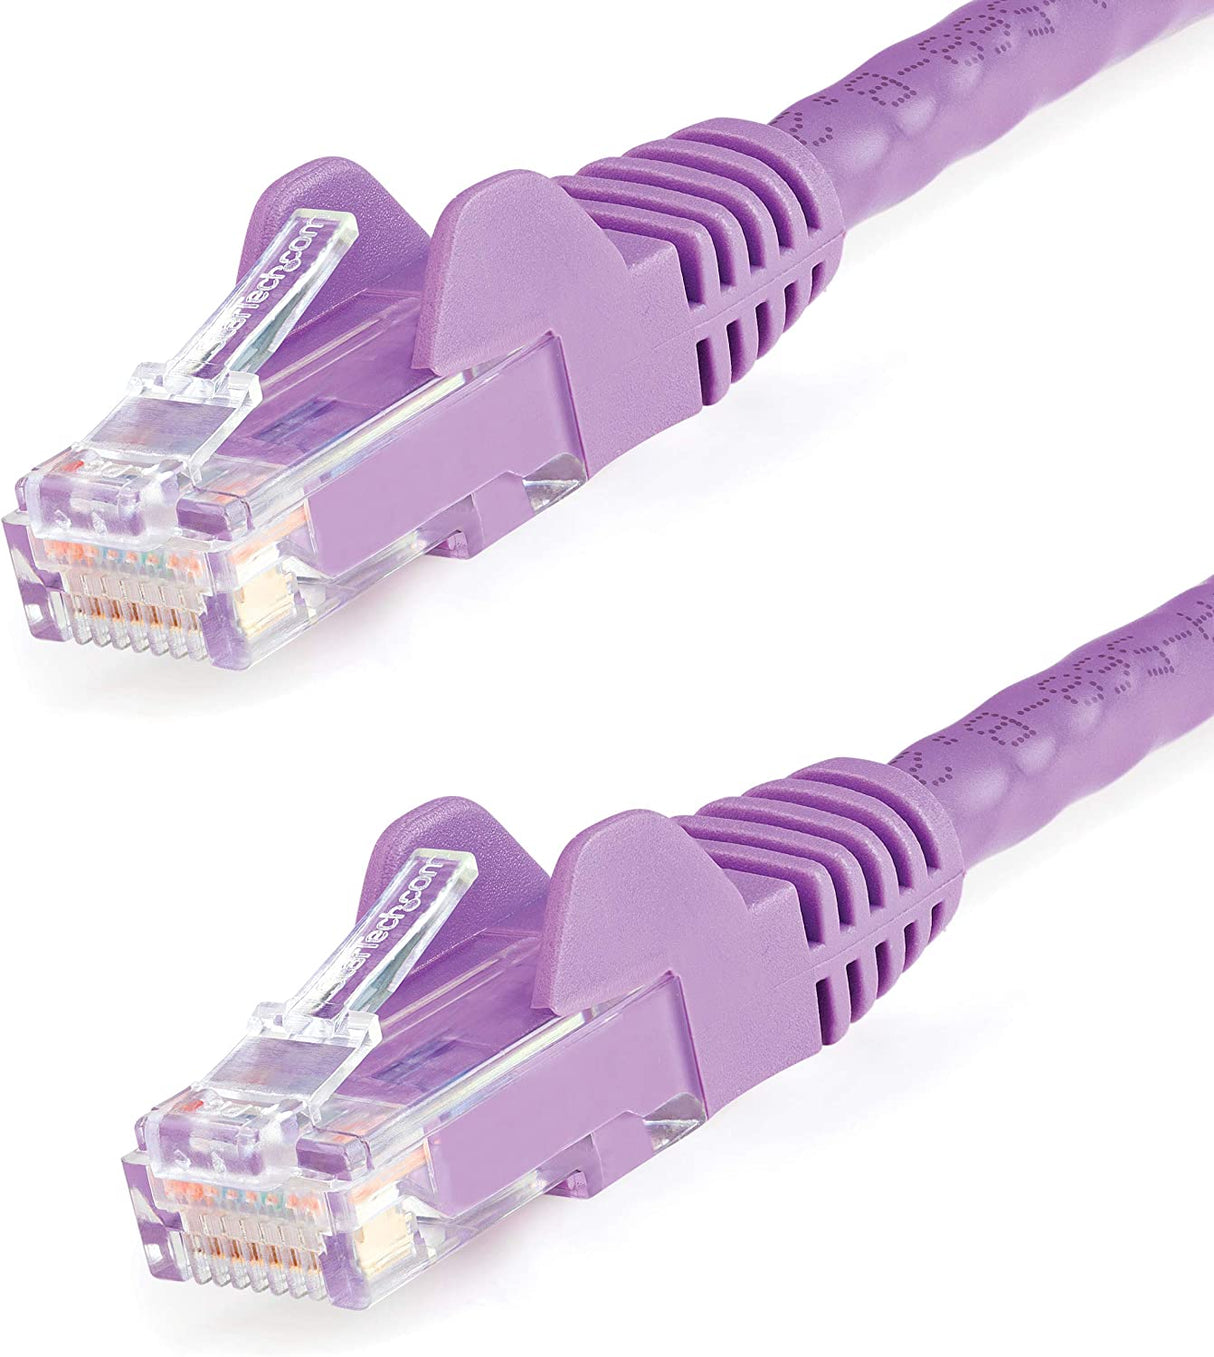 StarTech.com 2ft CAT6 Ethernet Cable - Purple CAT 6 Gigabit Ethernet Wire -650MHz 100W PoE RJ45 UTP Network/Patch Cord Snagless w/Strain Relief Fluke Tested/Wiring is UL Certified/TIA (N6PATCH2PL) Purple 2 ft / 0.6 m 1 Pack